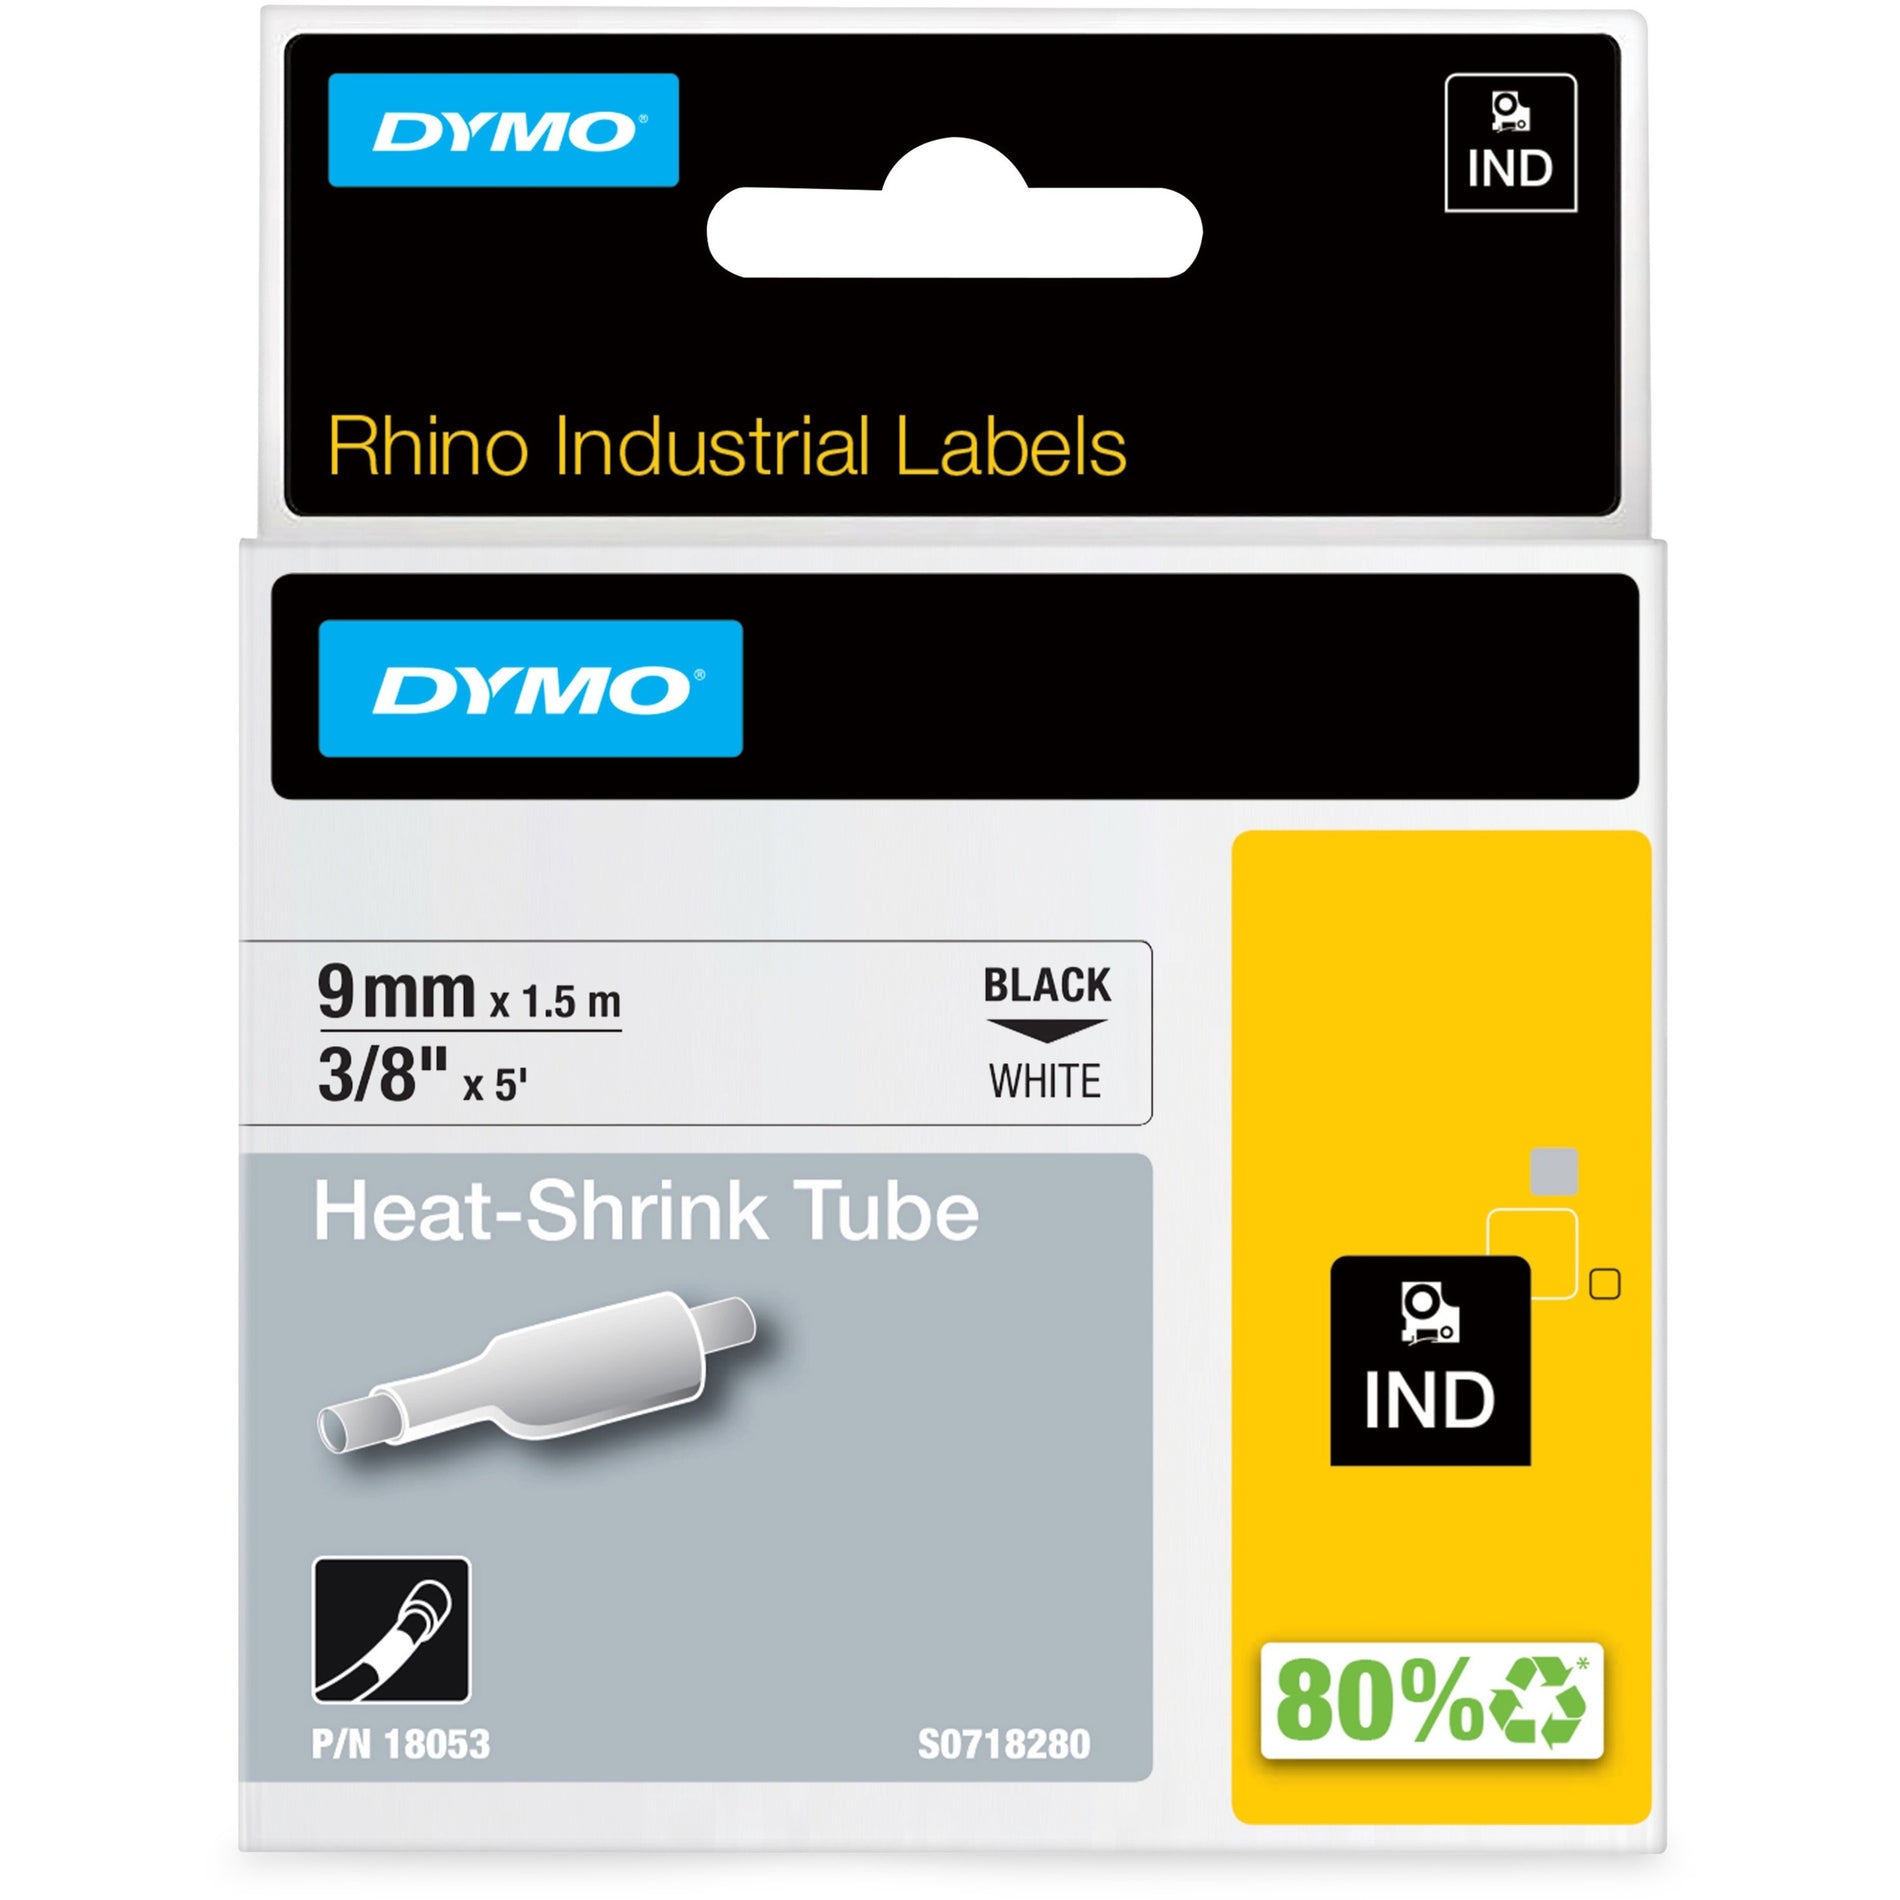 Dymo 18053 Rhino Heat Shrink Tube Labels, Wire & Cable Label, 3/8"x5', Black on White